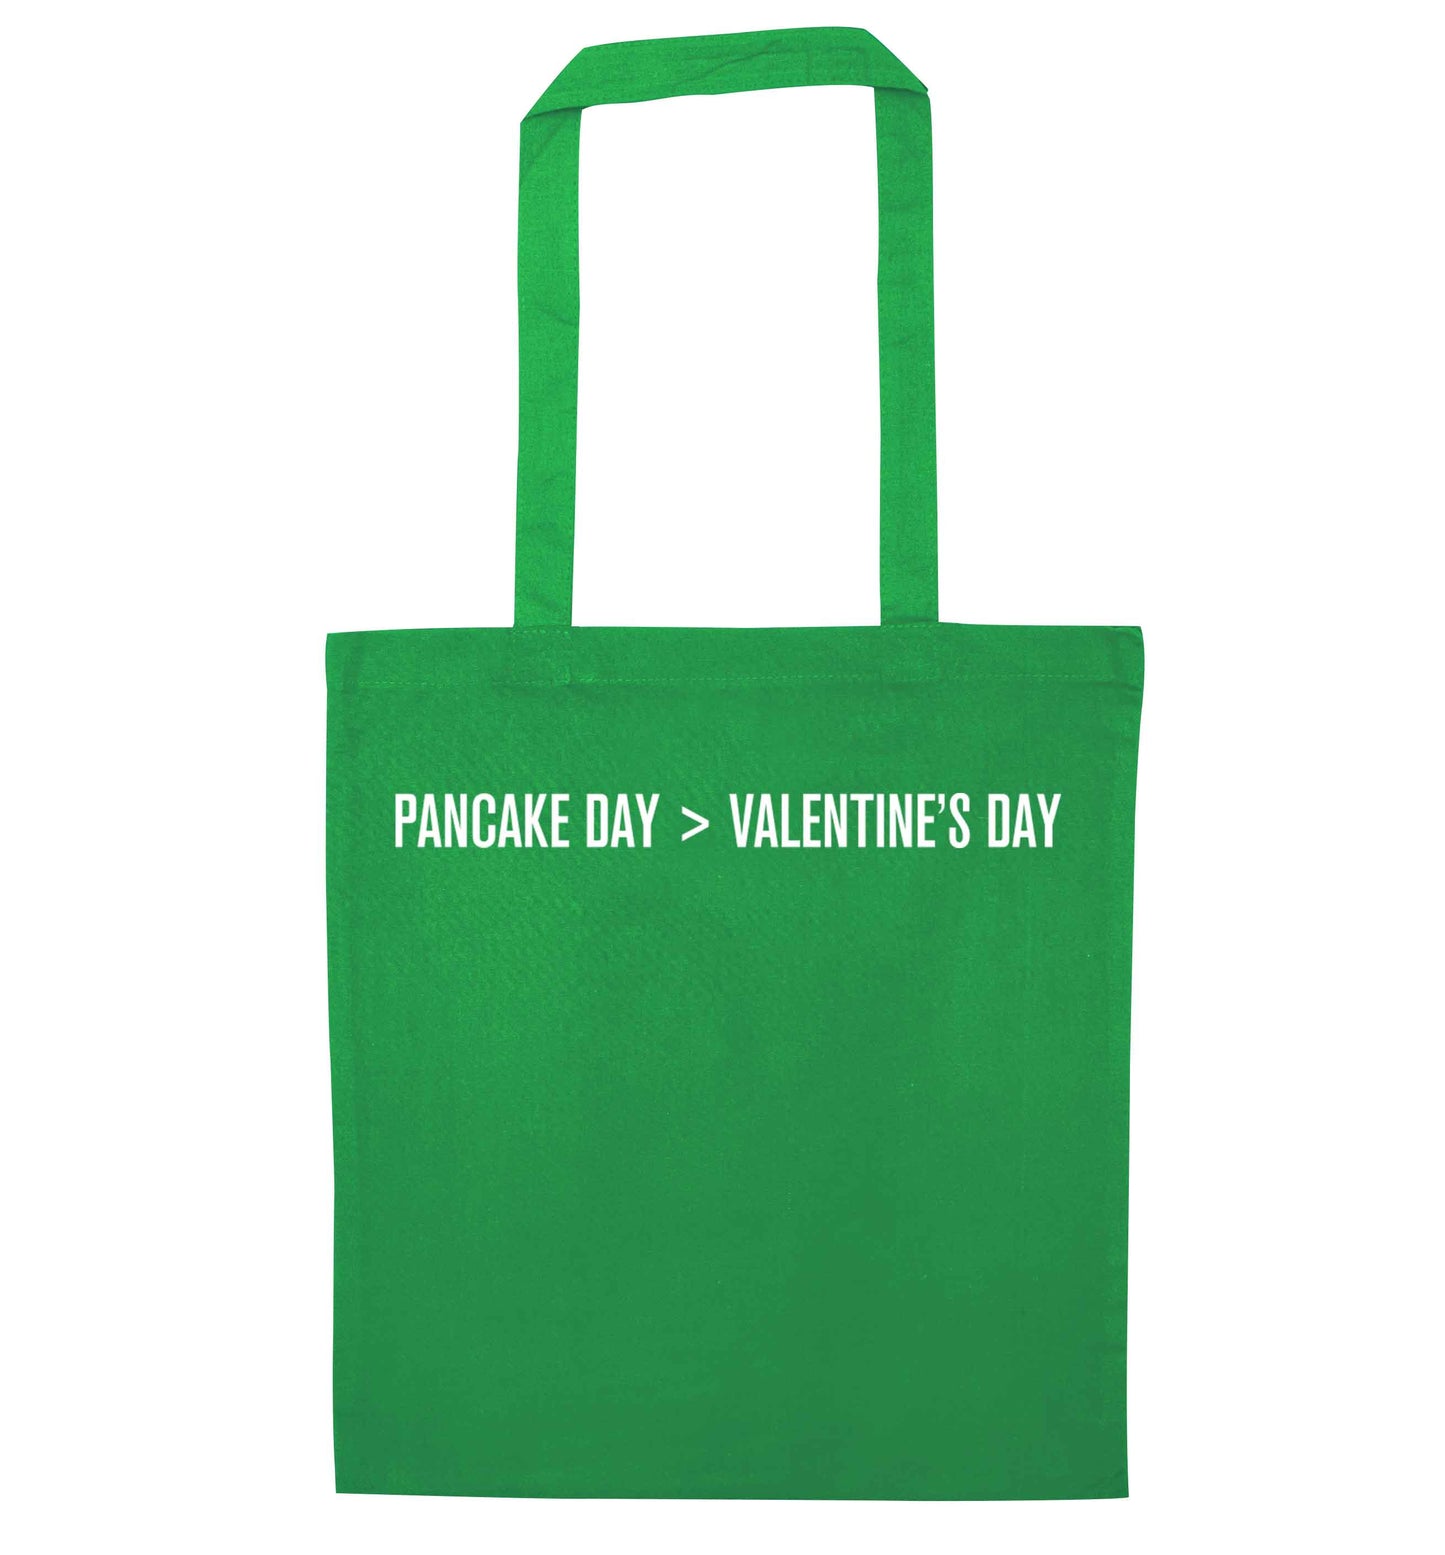 Pancake day > valentines day green tote bag